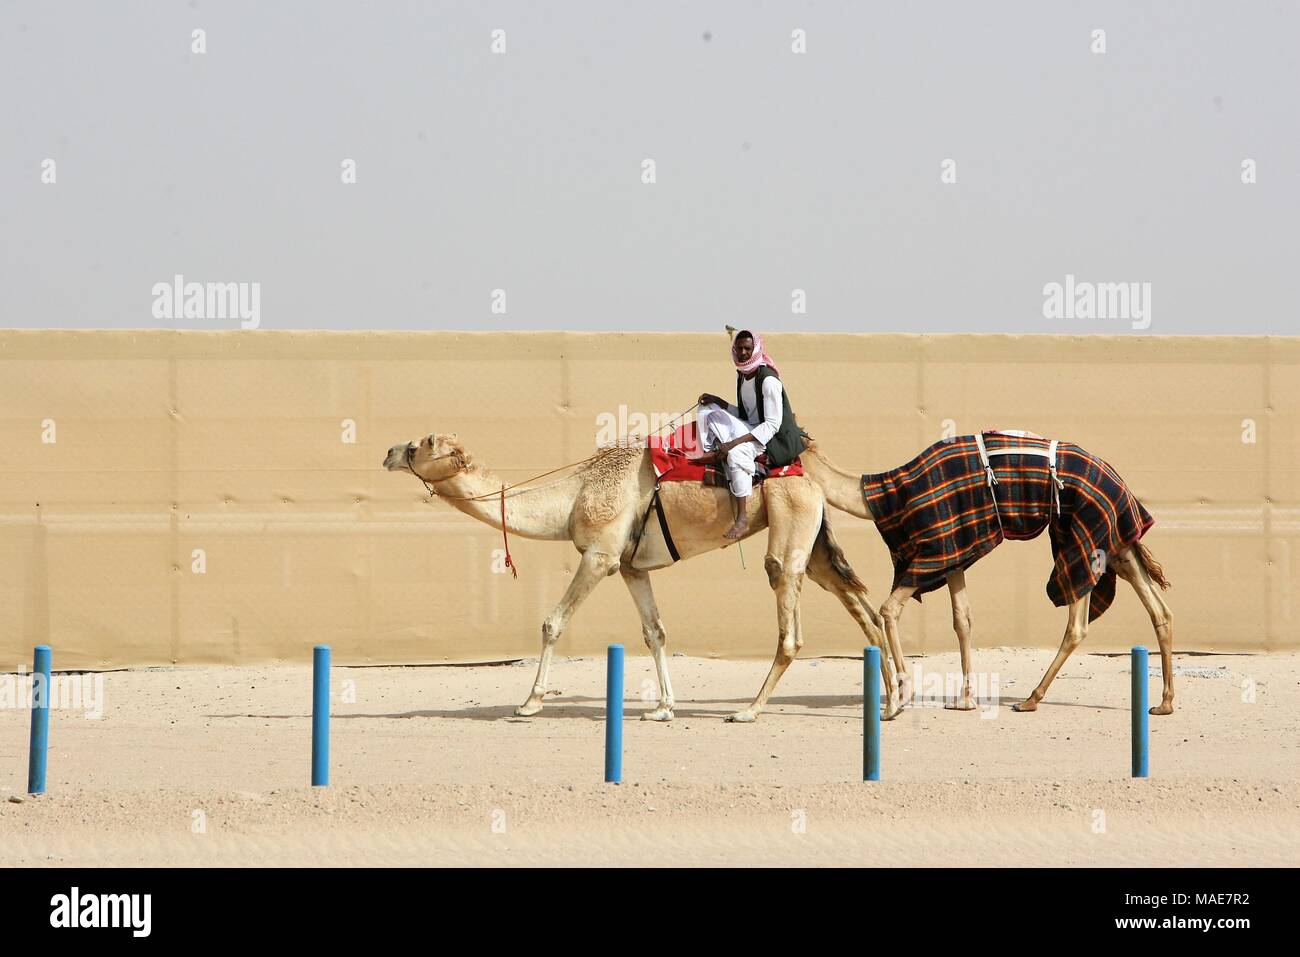 Kuwait City. 31st Mar, 2018. Photo taken on March 31, 2018 shows racing camels on their way to competition in Al Ahmadi Governorate in the South of Kuwait. Camel race is a highly popular fiercely competitive sporting event in Kuwait, it takes place on Saturdays between October and April in Al Ahmadi Governorate in the South of Kuwait. Credit: Nie Yunpeng/Xinhua/Alamy Live News Stock Photo